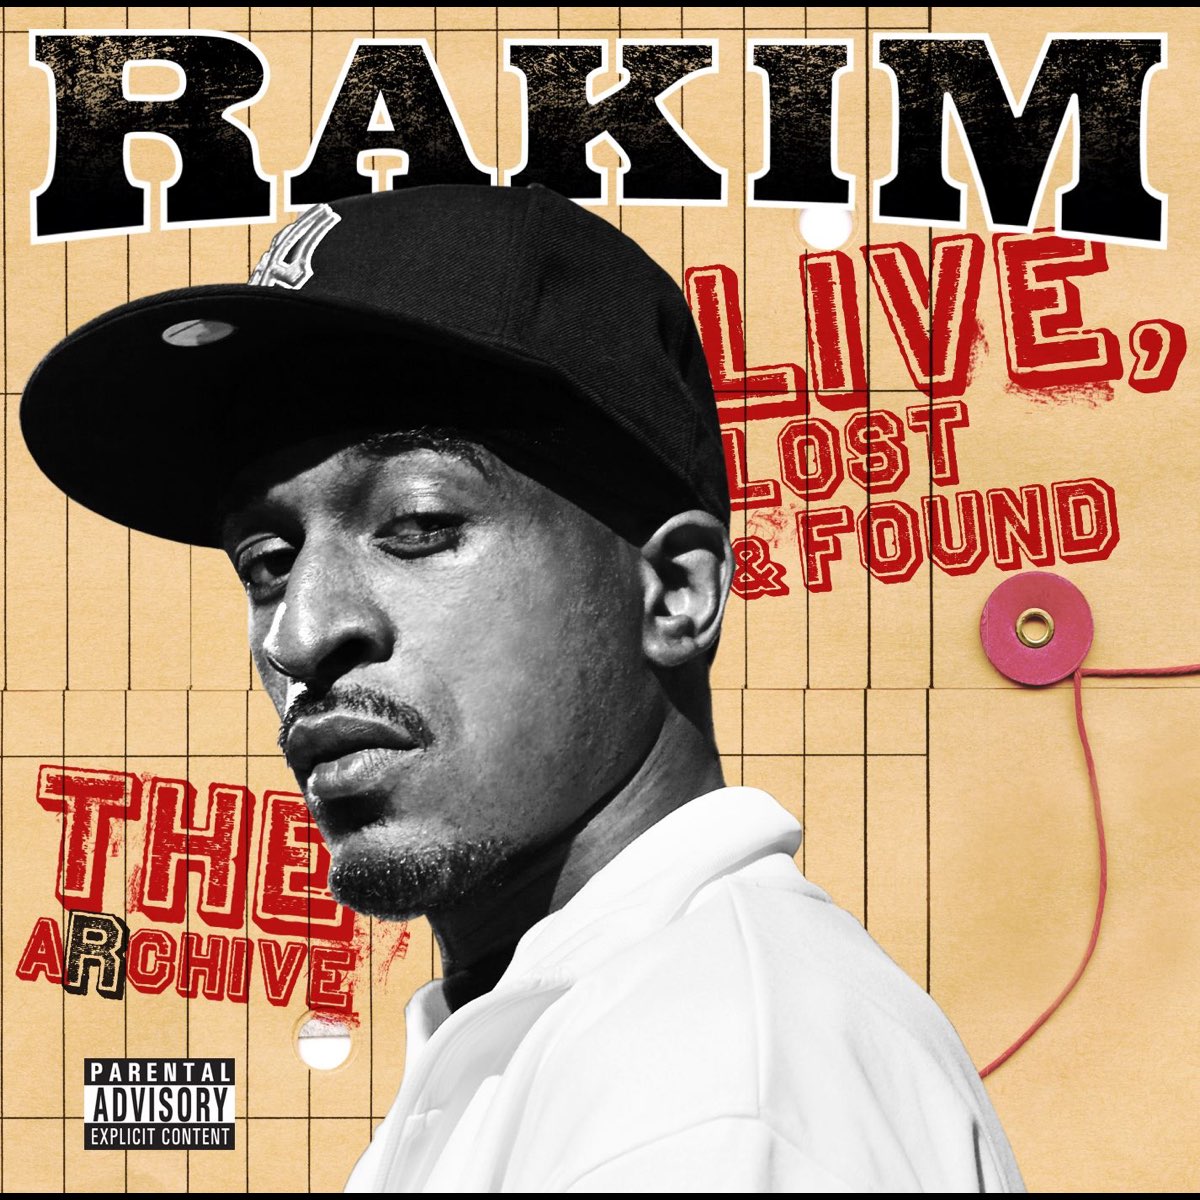 The Archive: Live, Lost & Found by Rakim on Apple Music